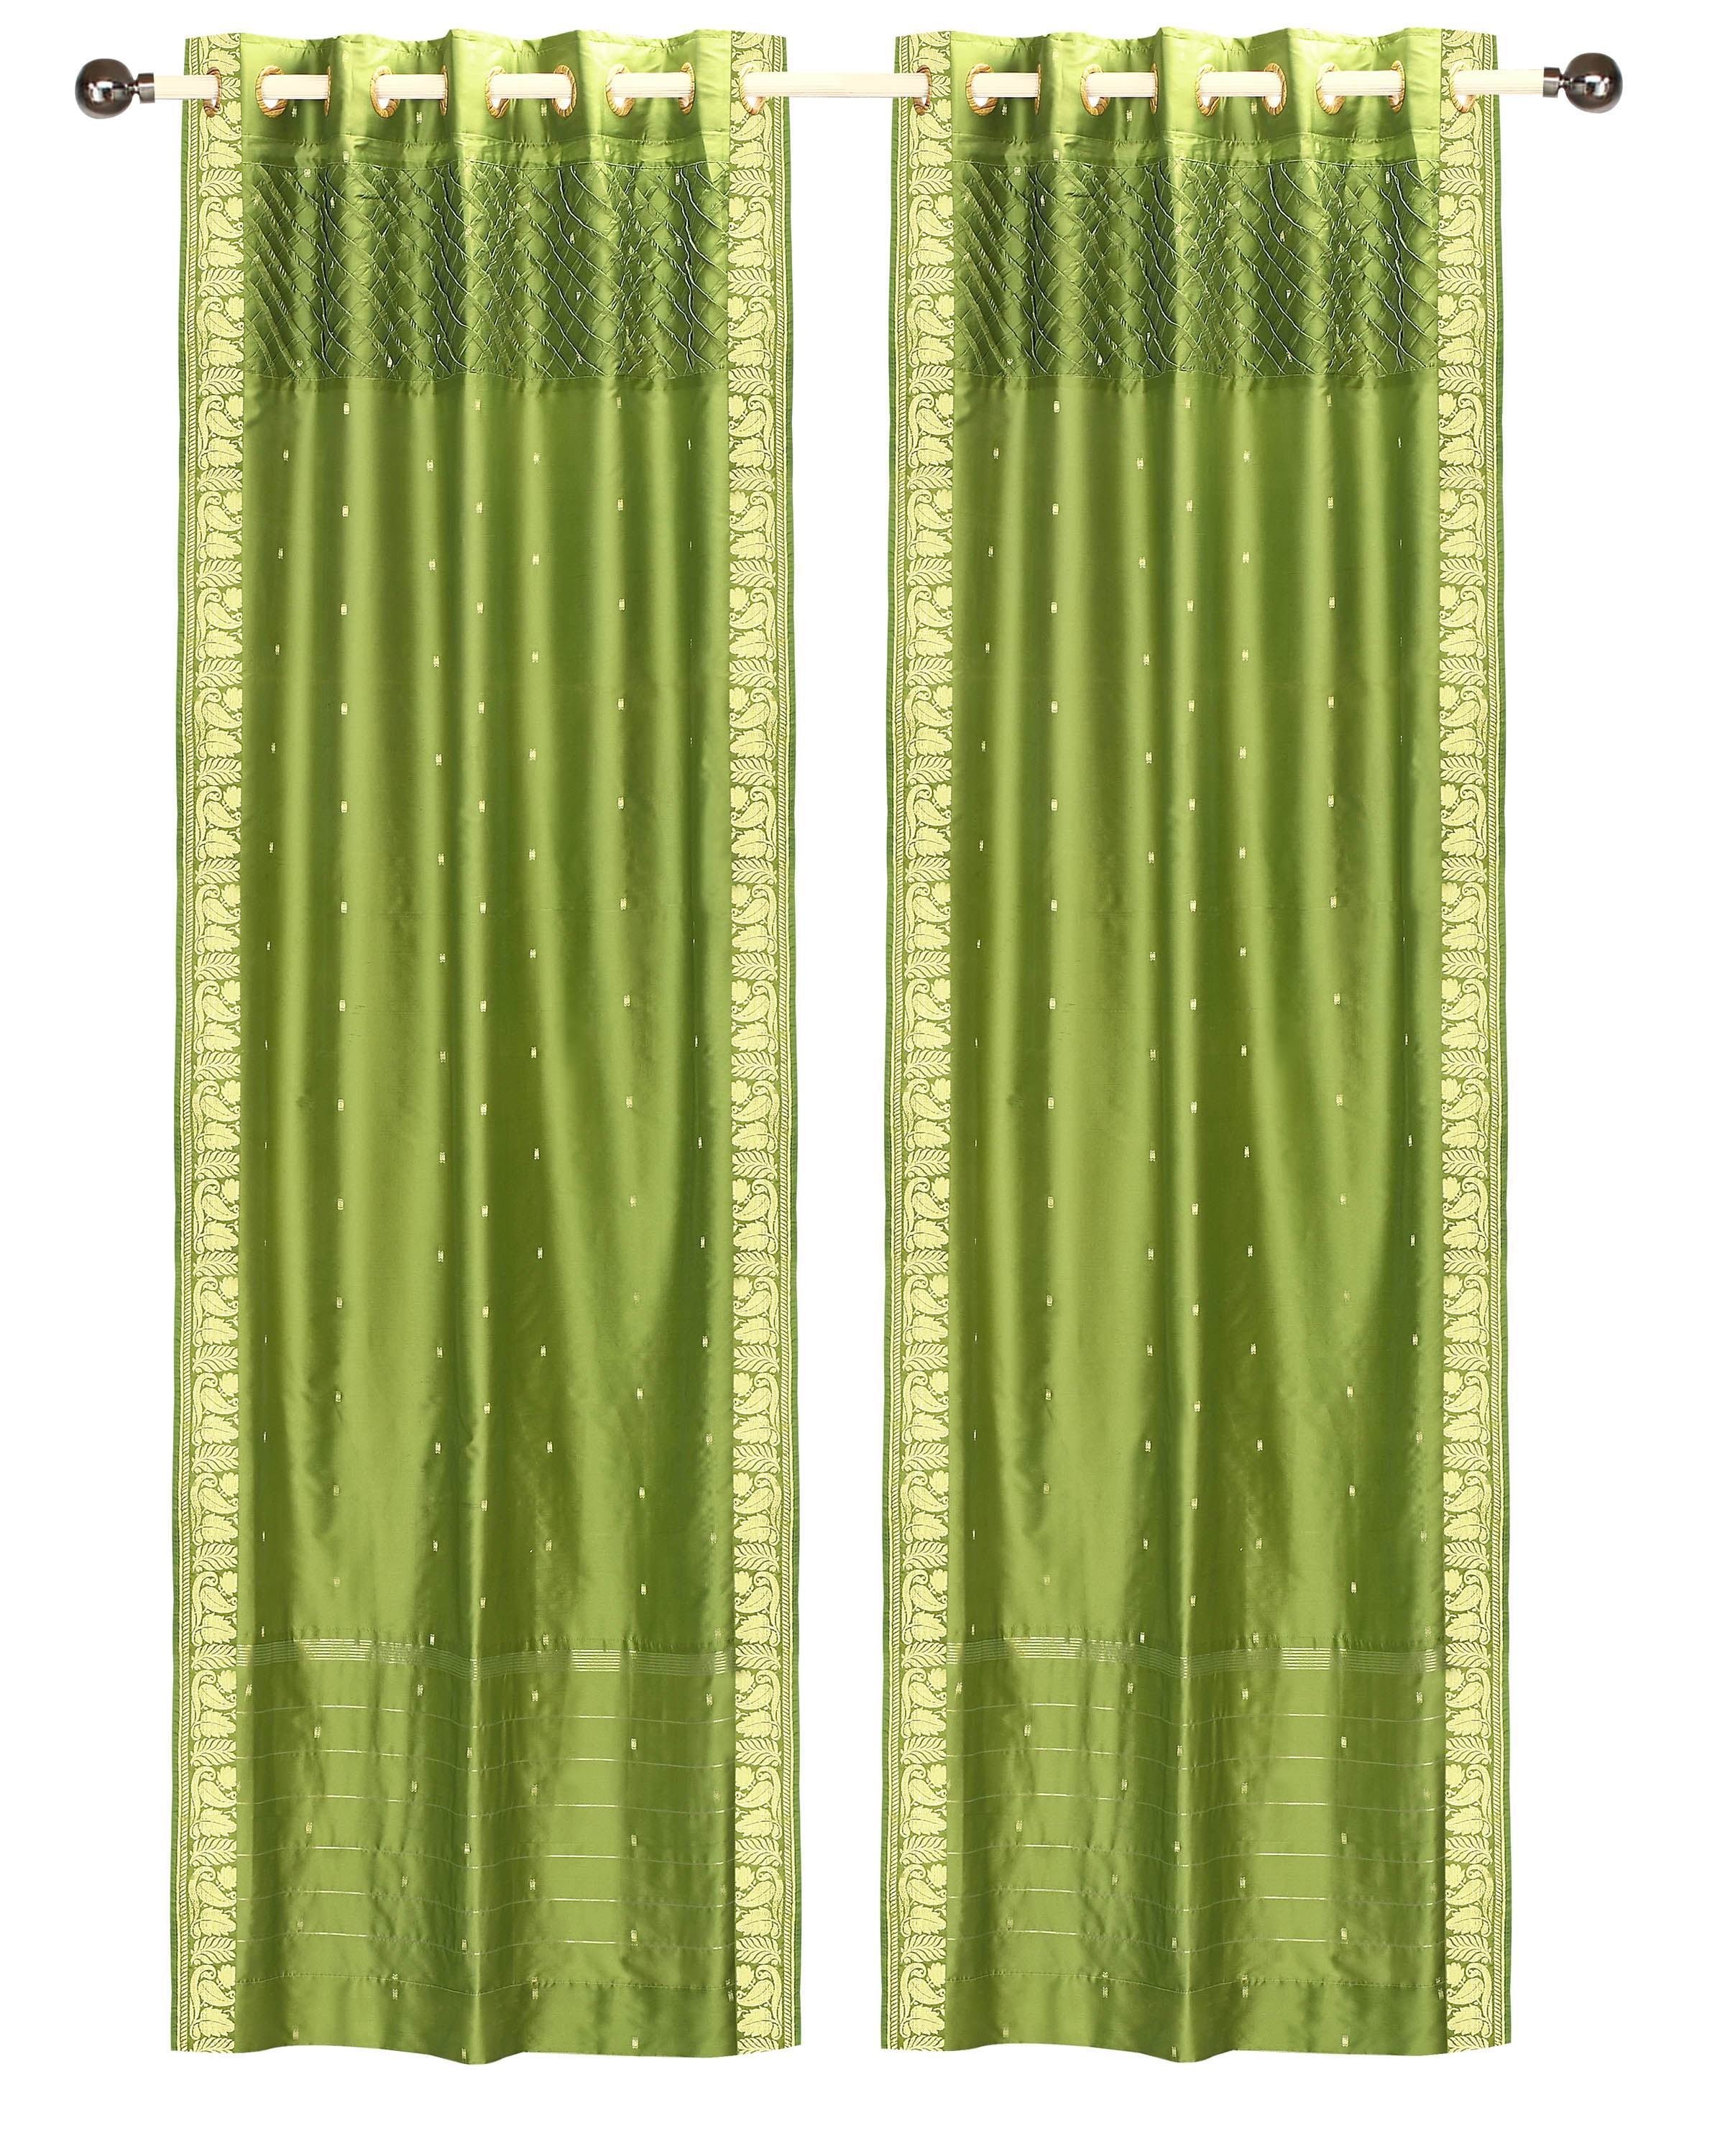 Lined-olive green Hand Crafted Grommet Sheer Sari Curtain Drape ...